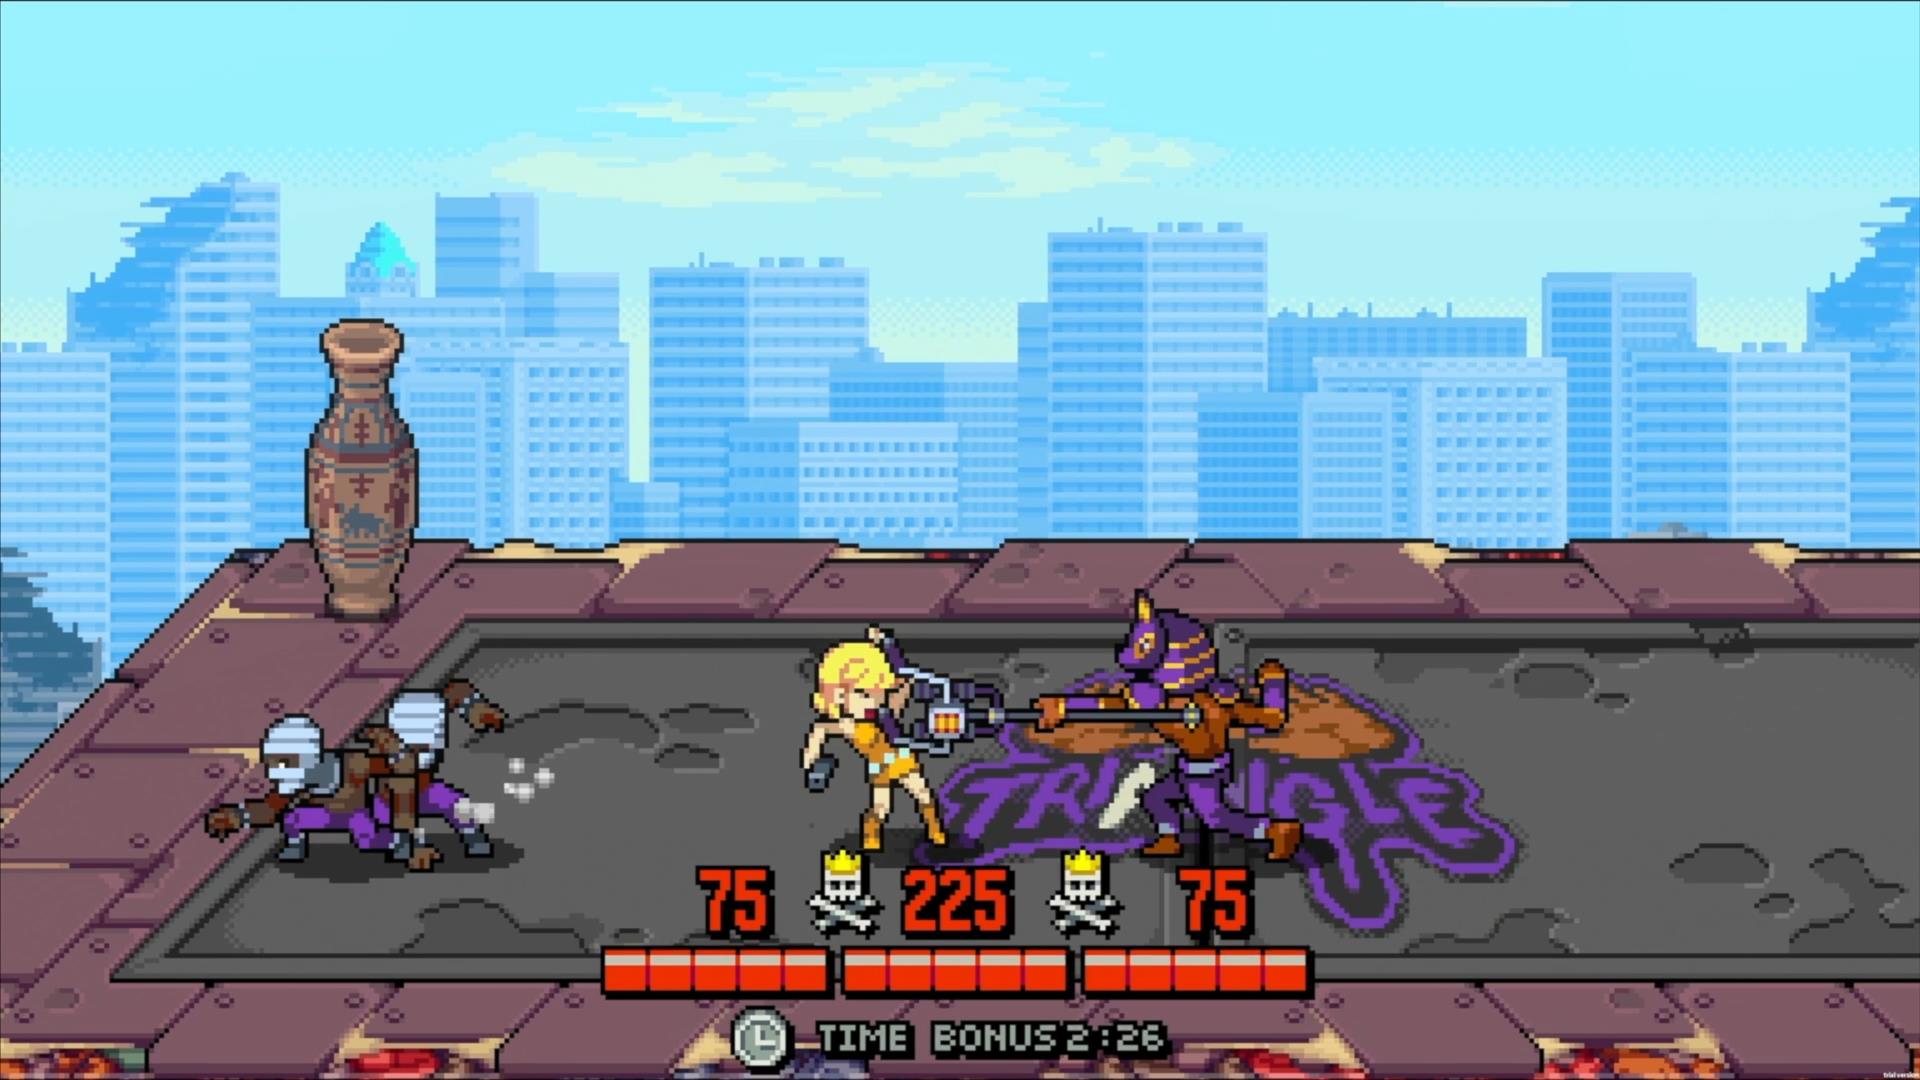 Double Dragon Gaiden: Rise of the Dragons tries to revive the